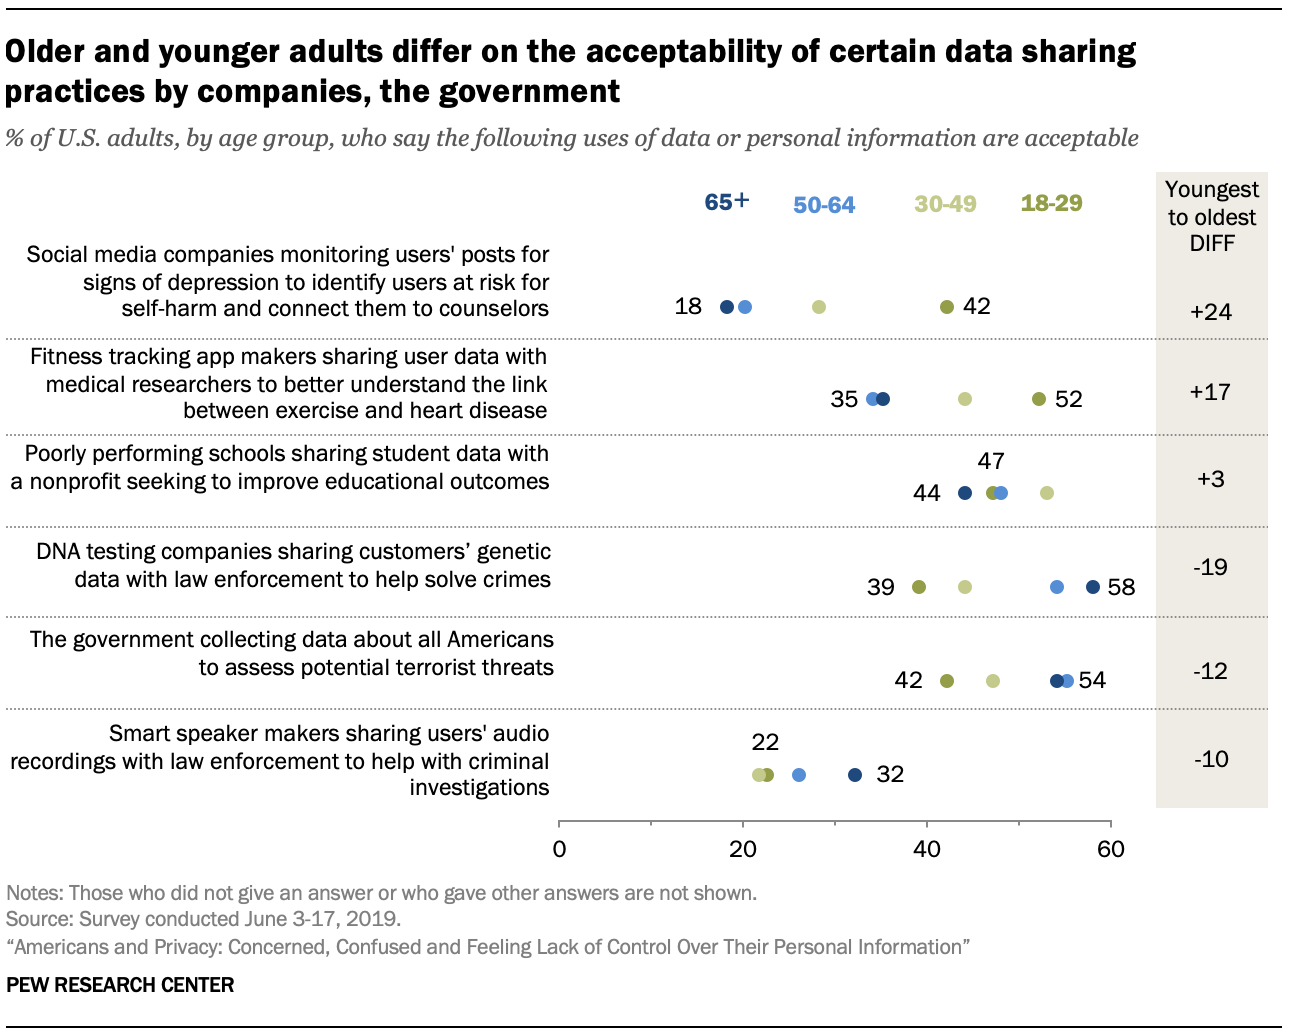 Older and younger adults differ on the acceptability of certain data sharing practices by companies, the government